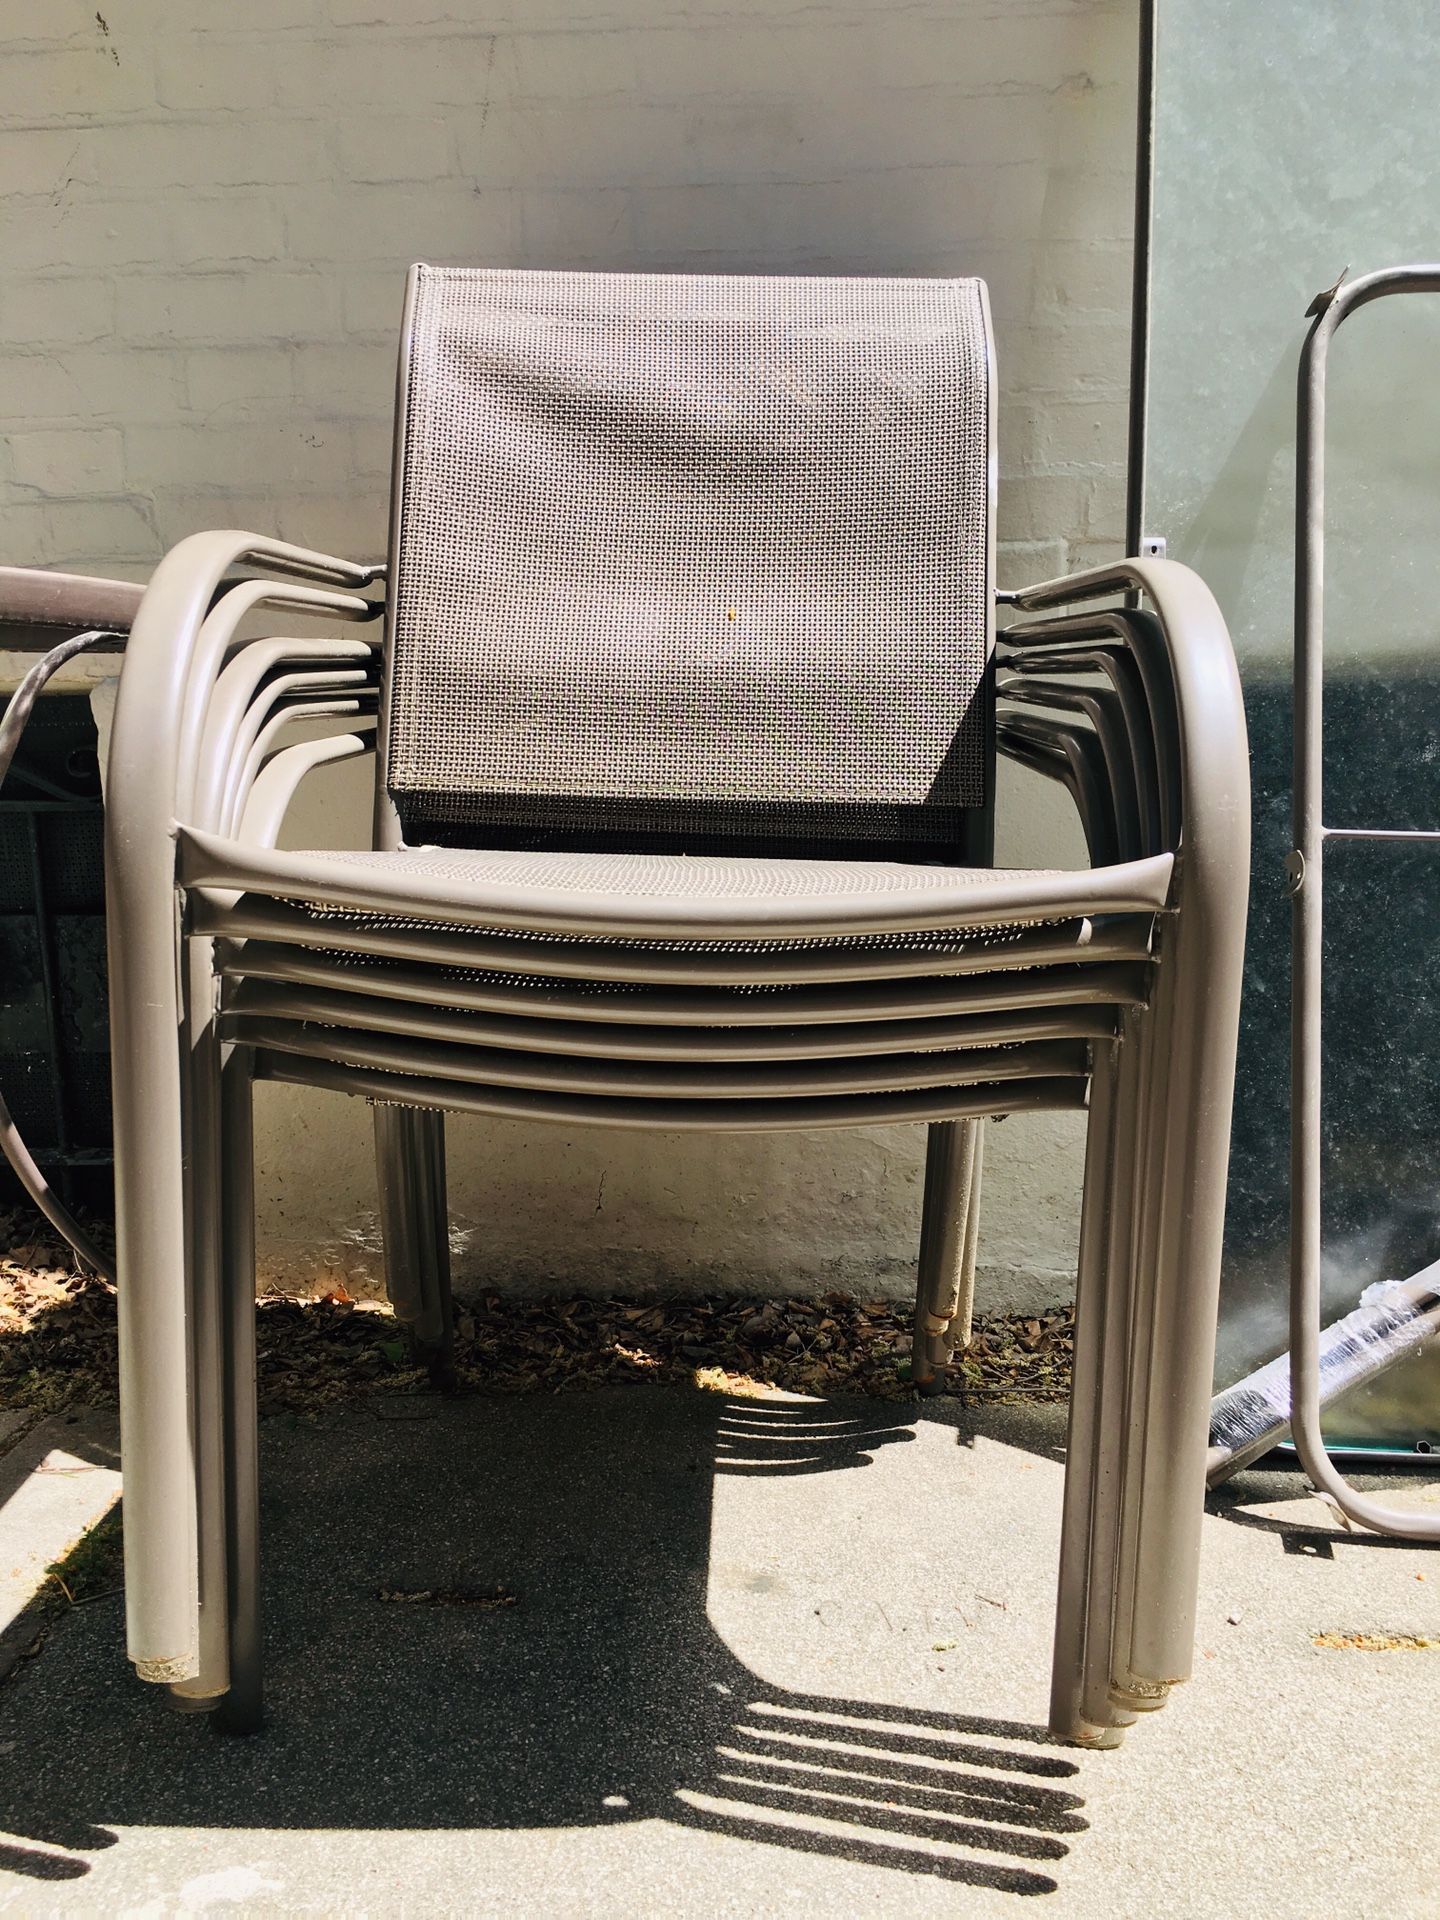 FREE!! Patio set. 5 chairs & 2 tables w/ all hardware